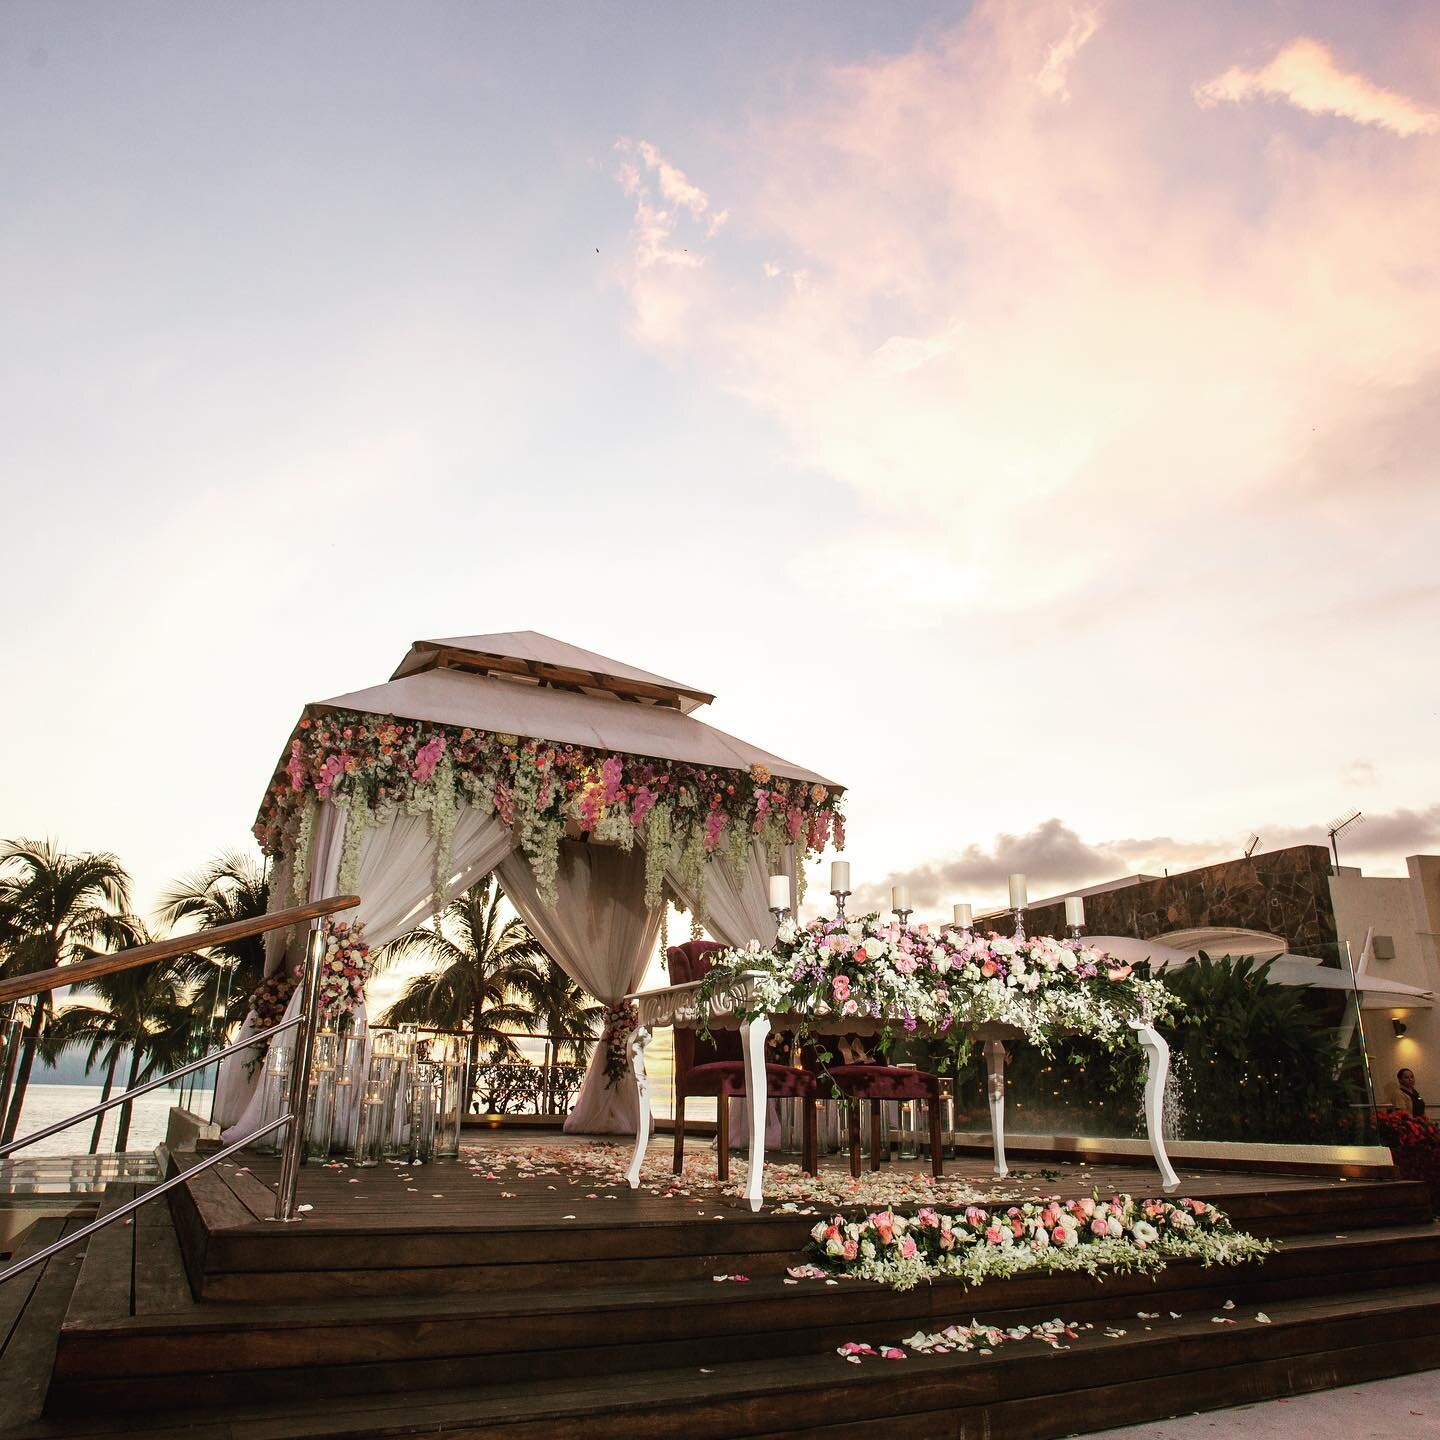 The stunning Terraza La Vista at Now Amber overlooks the Pacific Ocean along the coast of Puerto Vallarta. The perfect destination wedding location for brides who want a &ldquo;high heel friendly&rdquo; ceremony.
.
.
.
.
.
.
#destinationwedding #mexi